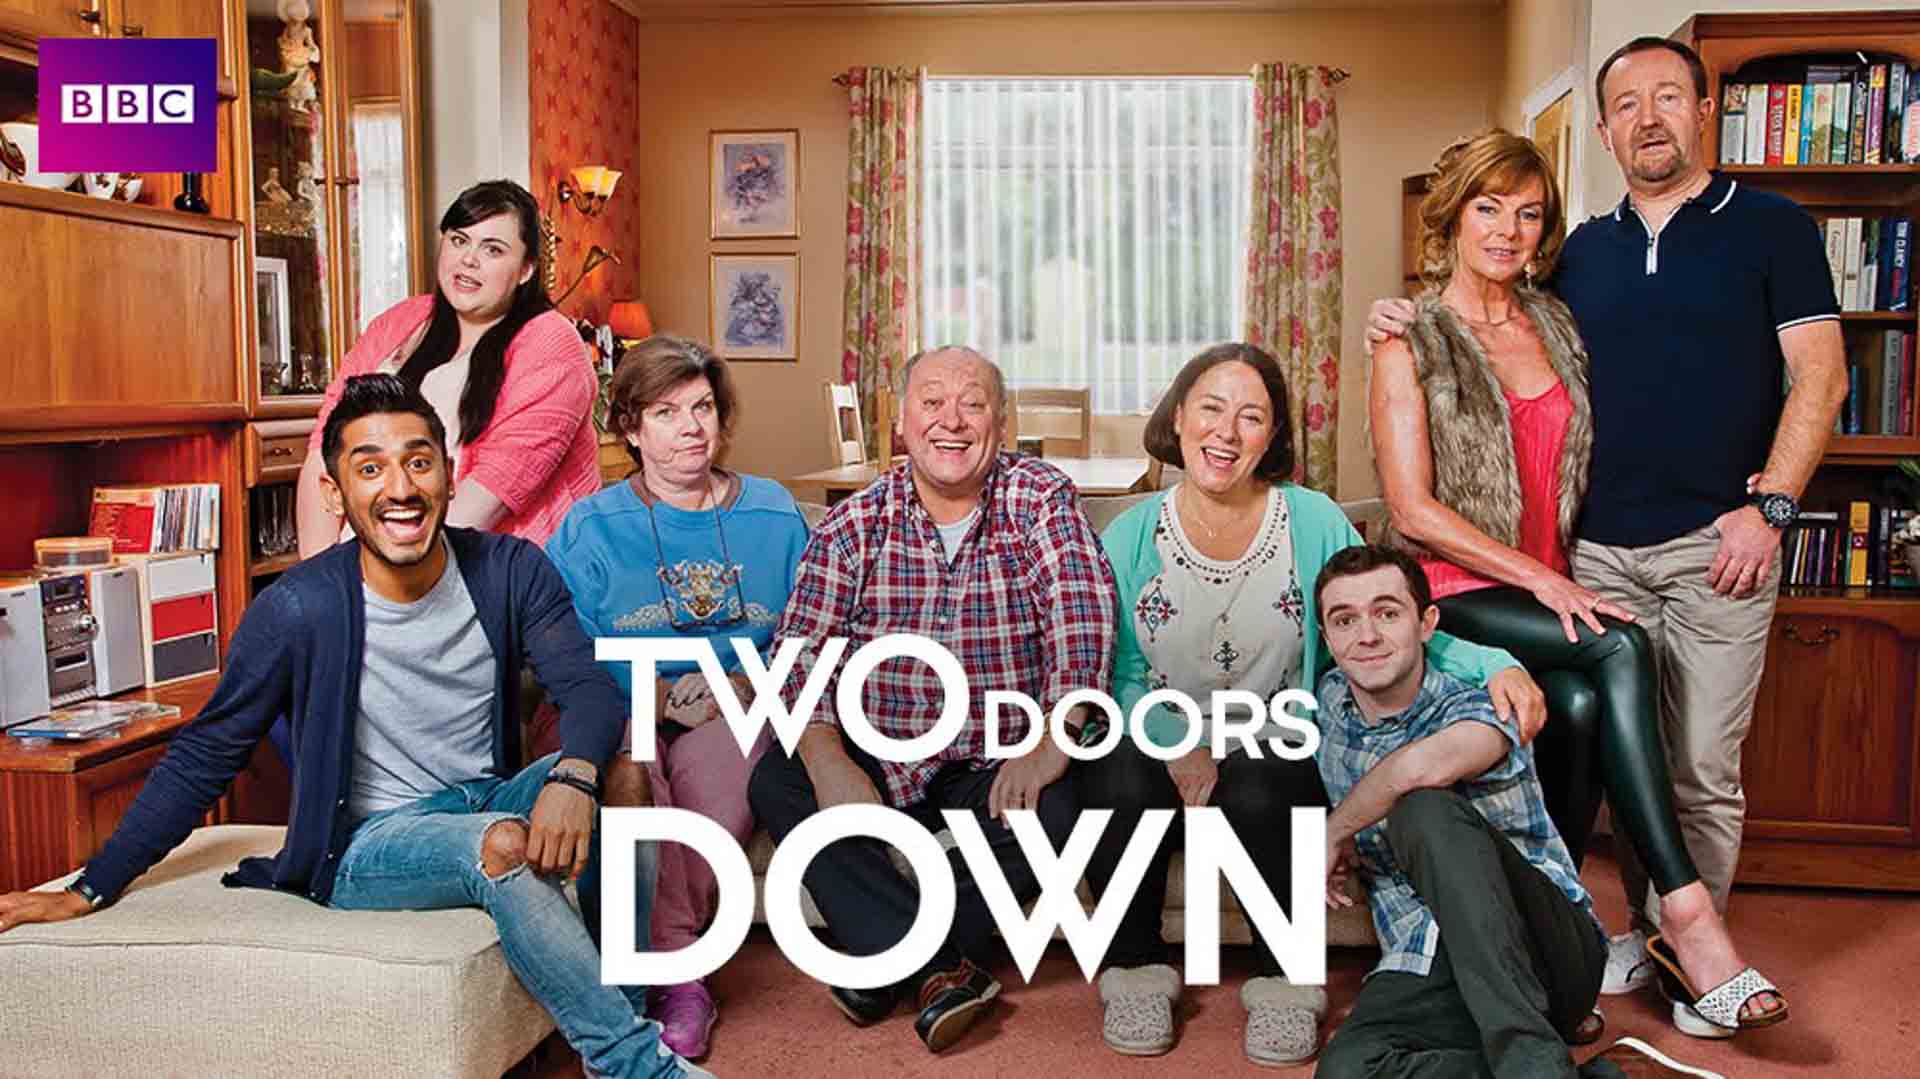 BBC Two Doors Down